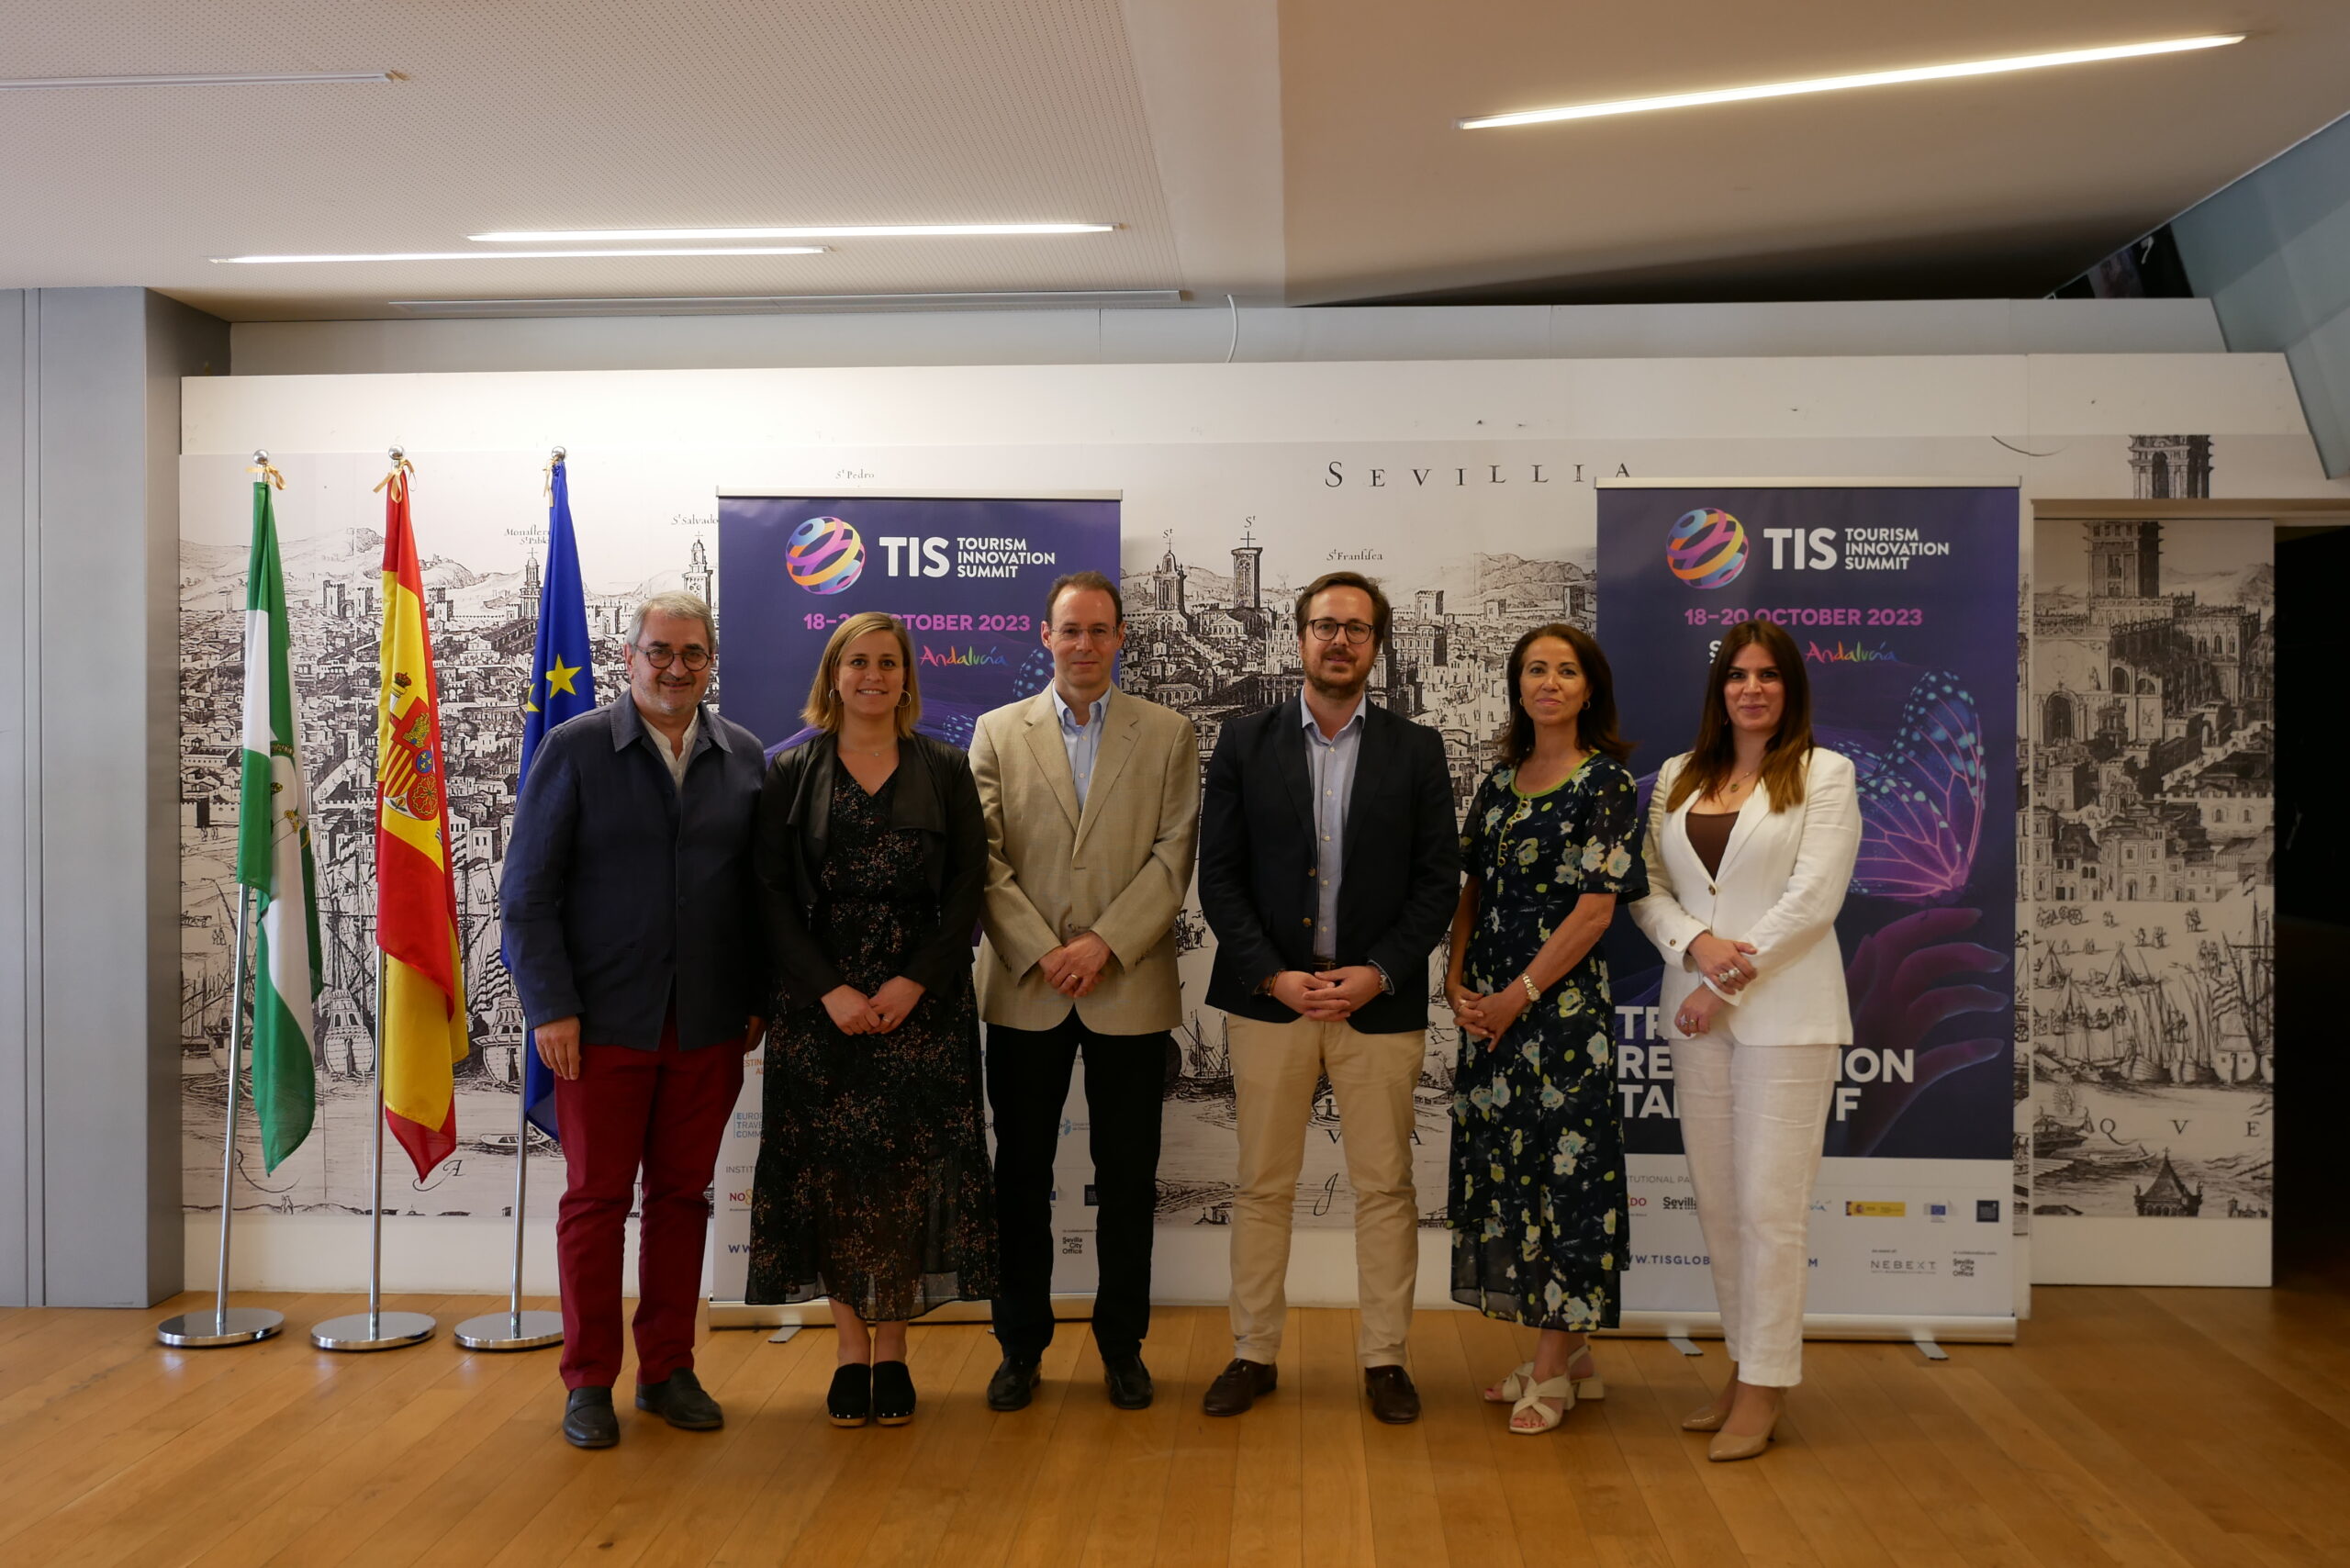 TIS - Tourism Innovation Summit 2023 returns to Seville to drive a smarter, digital and sustainable tourism